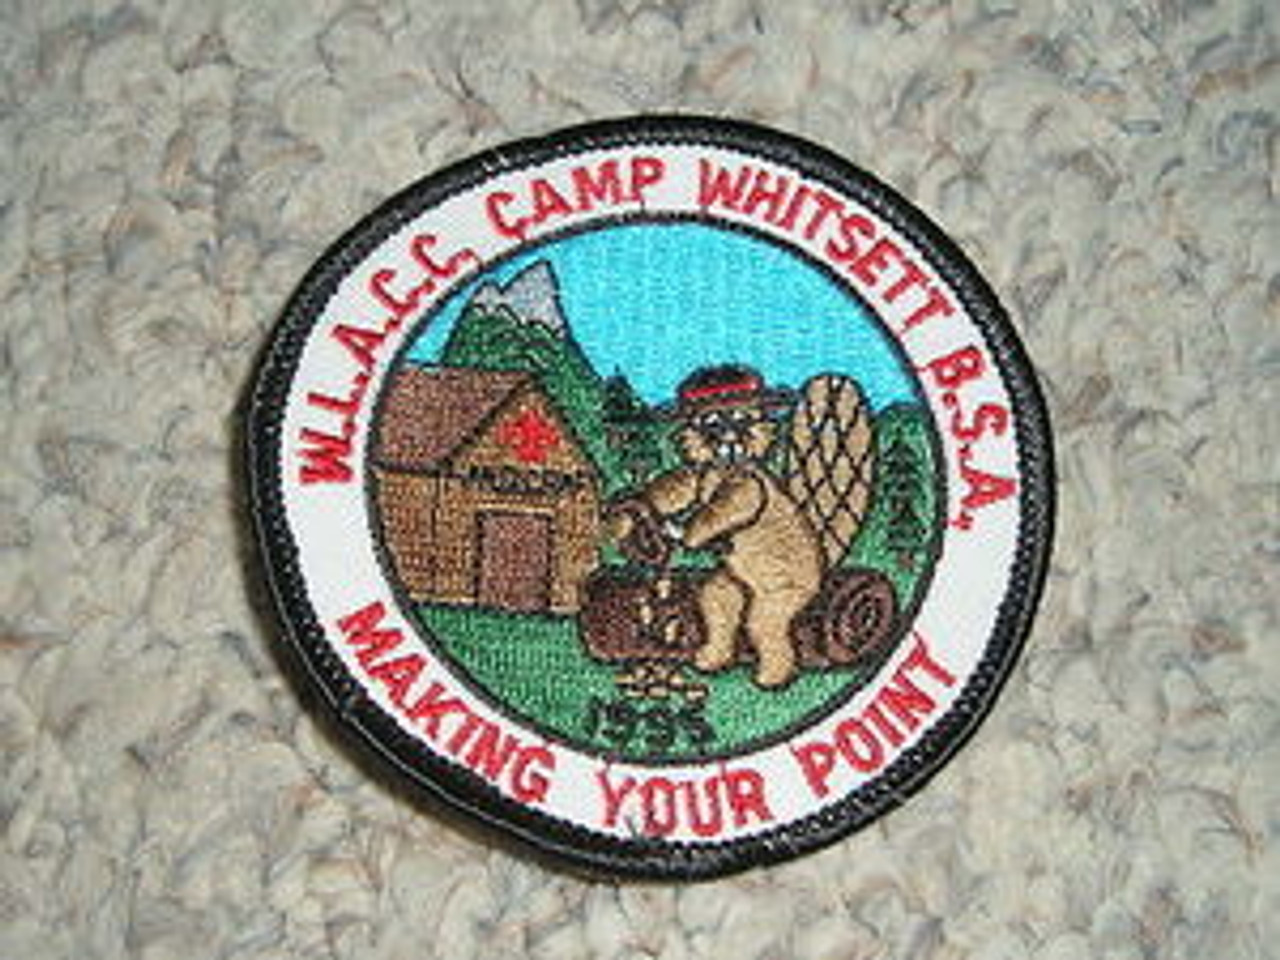 1995 Camp Whitsett Patch - Scout